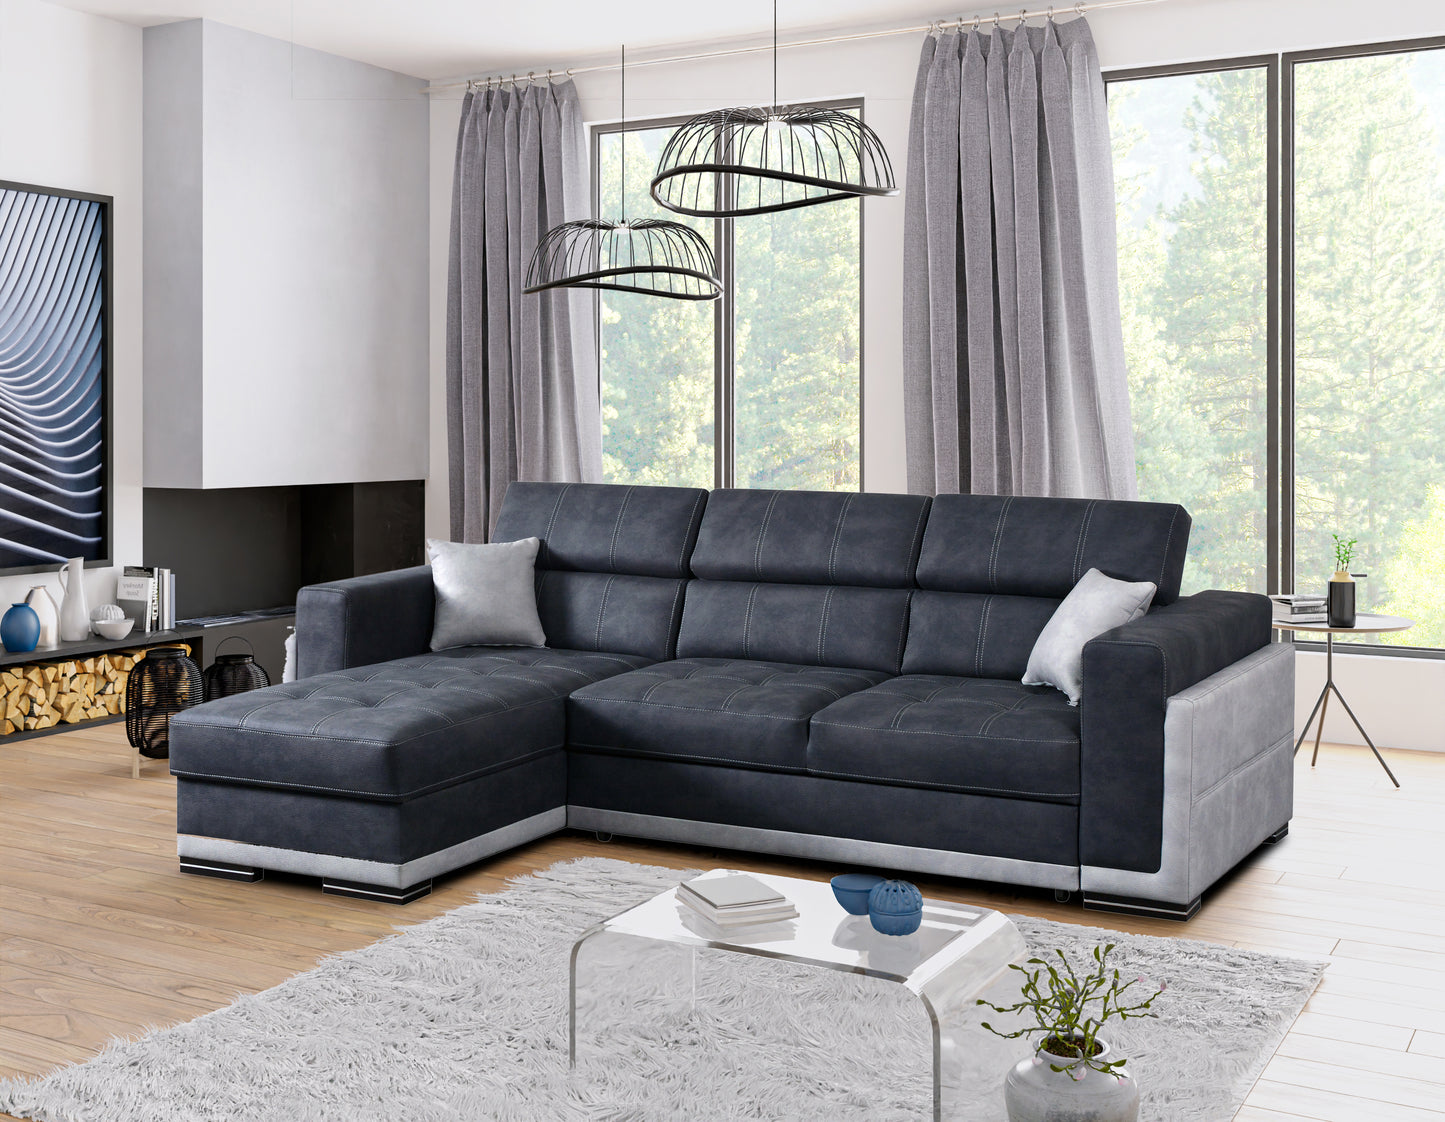 BARI 1 - Modern Corner Sofa with optional Sofa Bed Function and Storage. Various Colours >272x172cm<